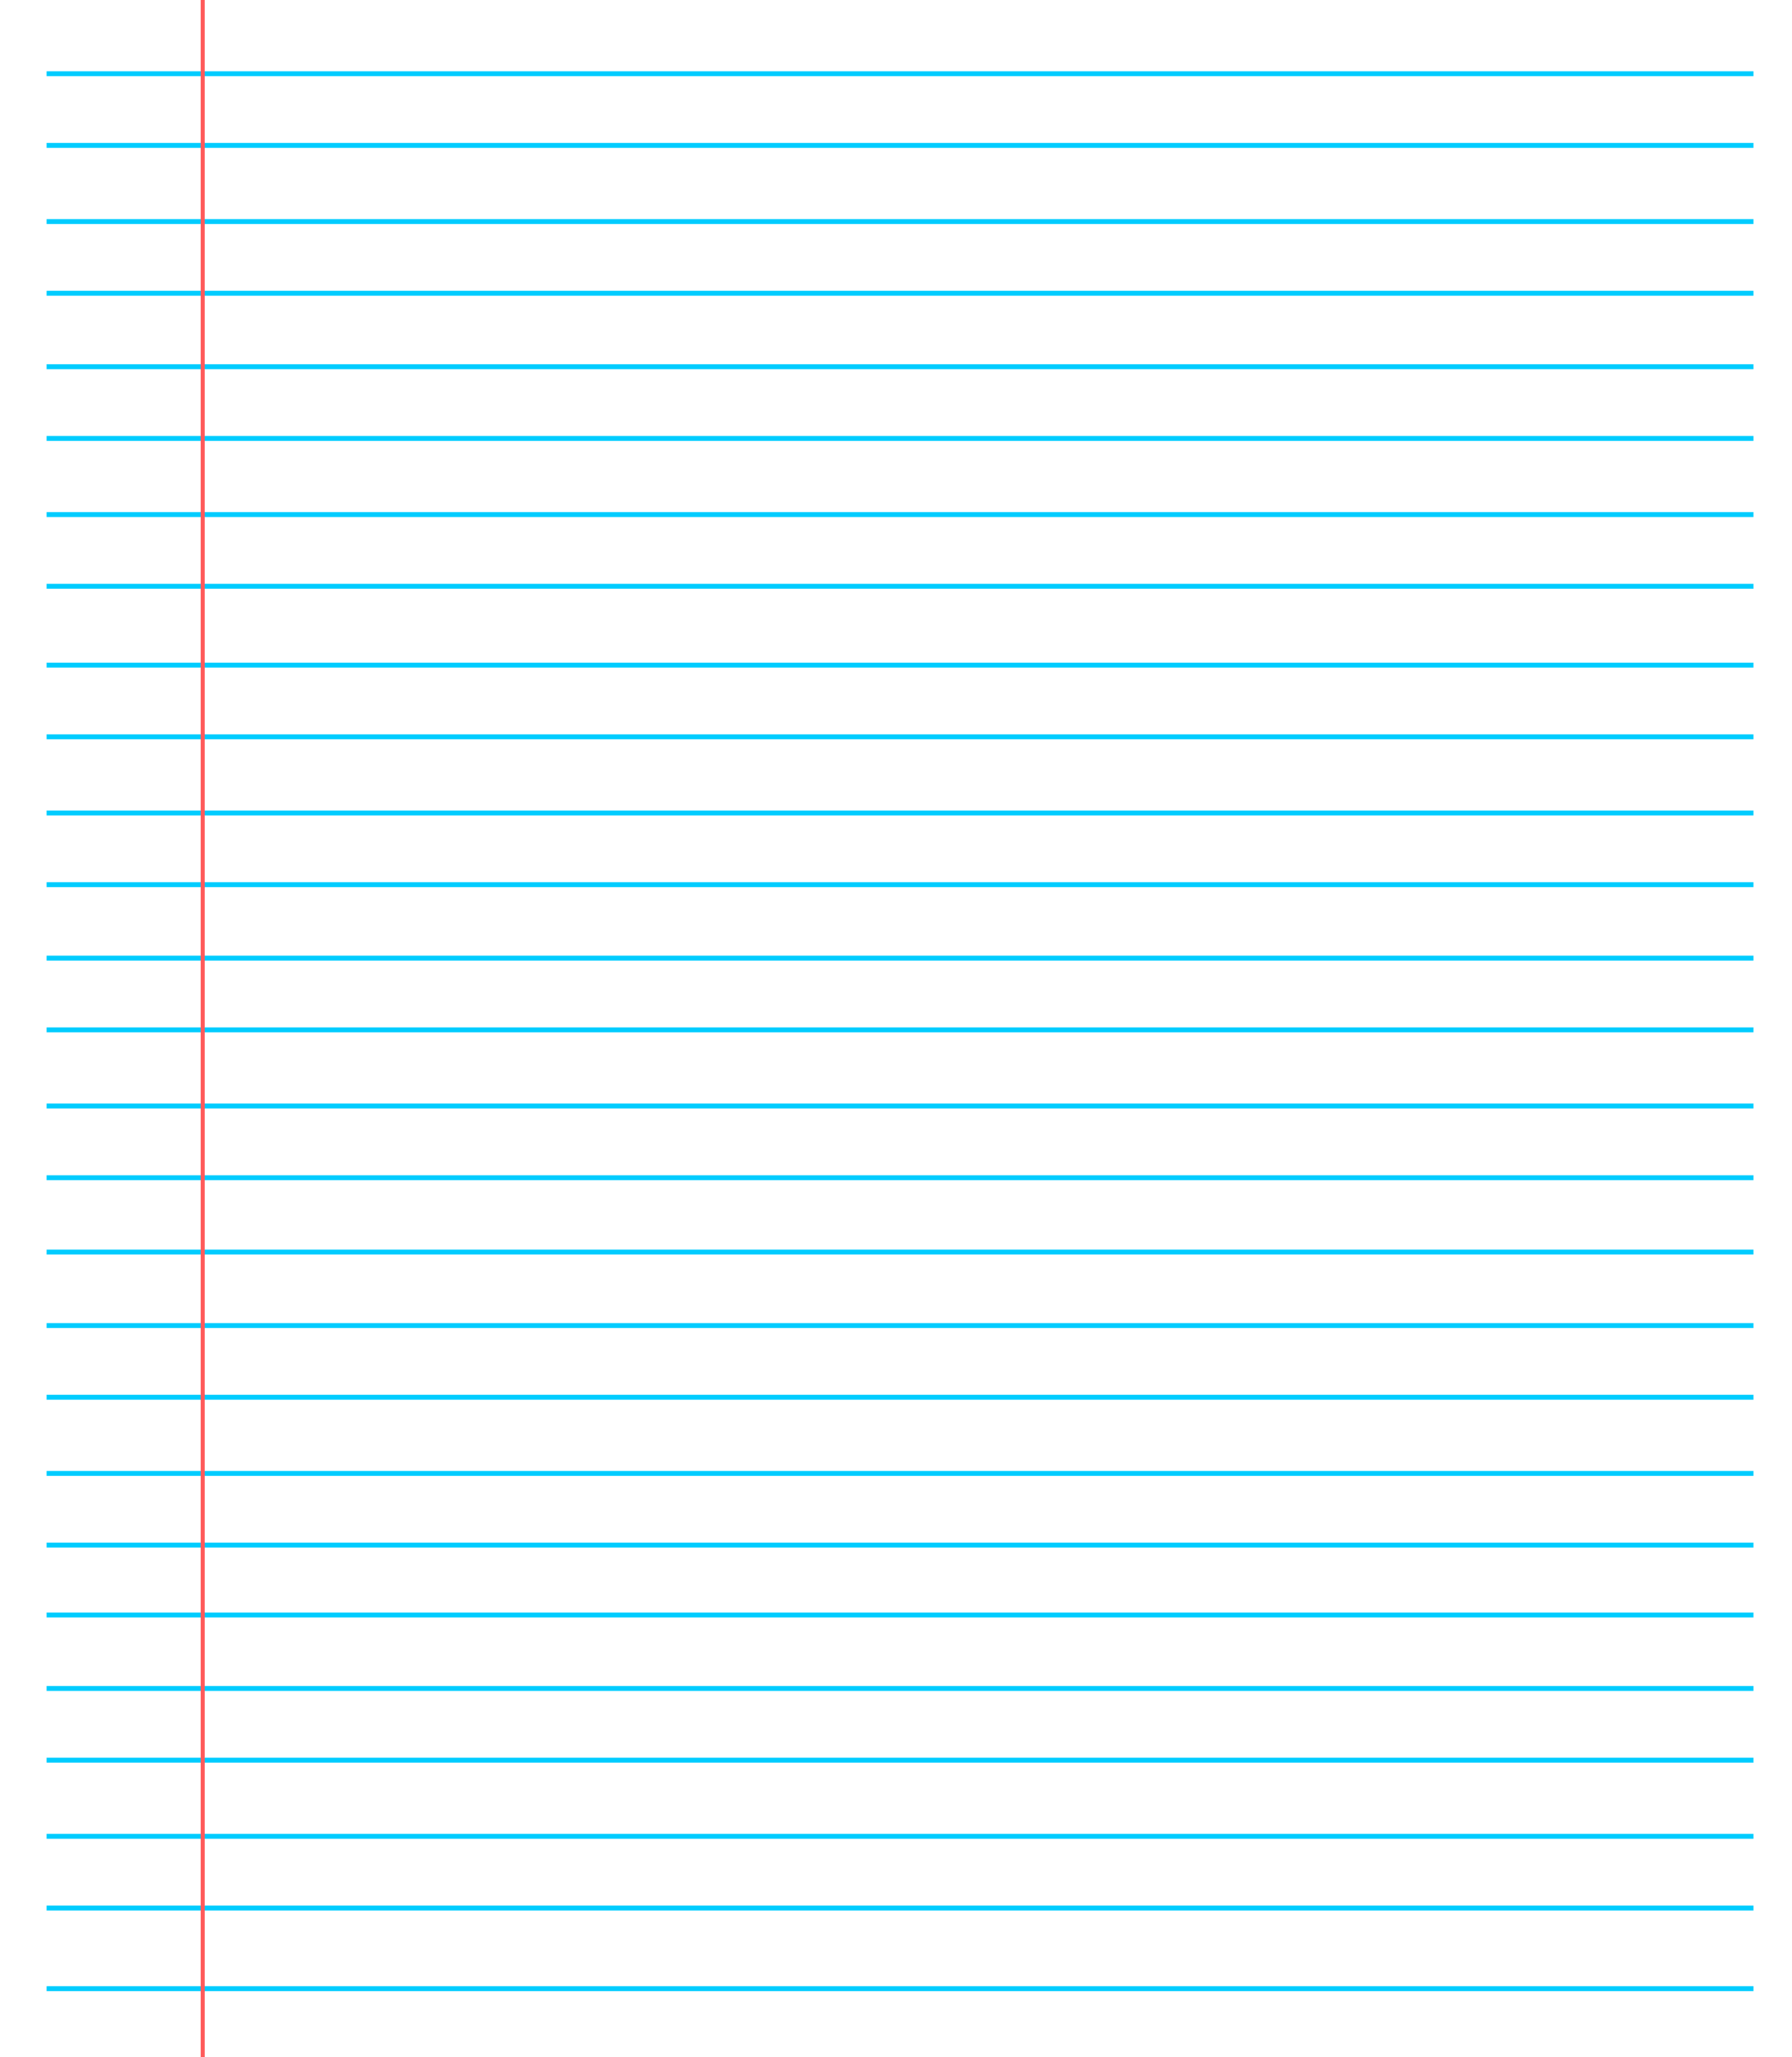 ❤️20+ Free Printable Blank Lined Paper Template In Pdf❤️ For Microsoft Word Lined Paper Template